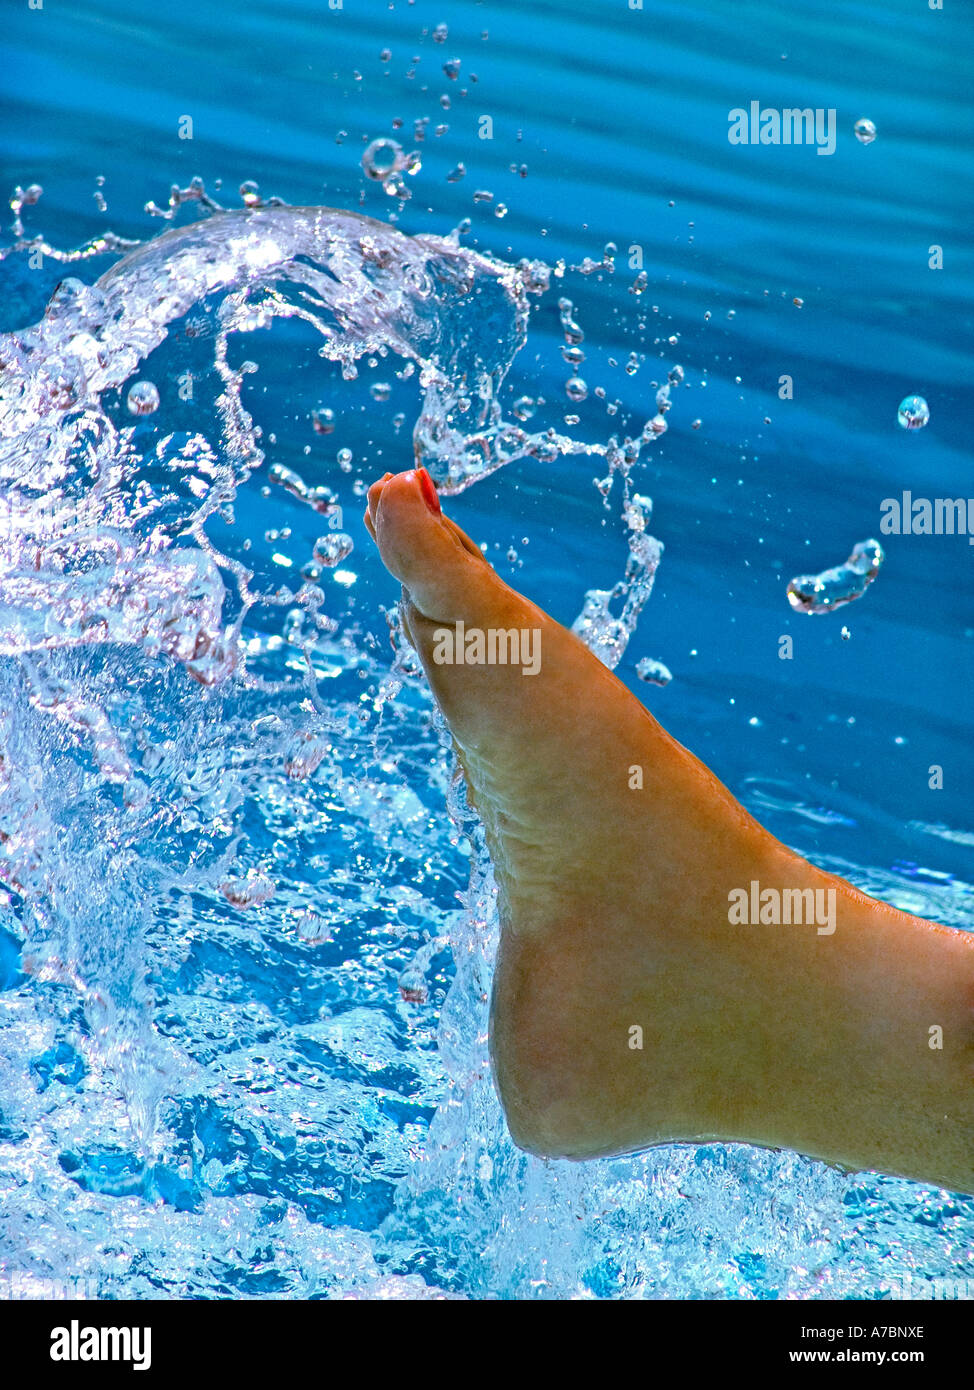 Woman's foot splashing the fresh clear water in a sunny swimming pool Stock Photo